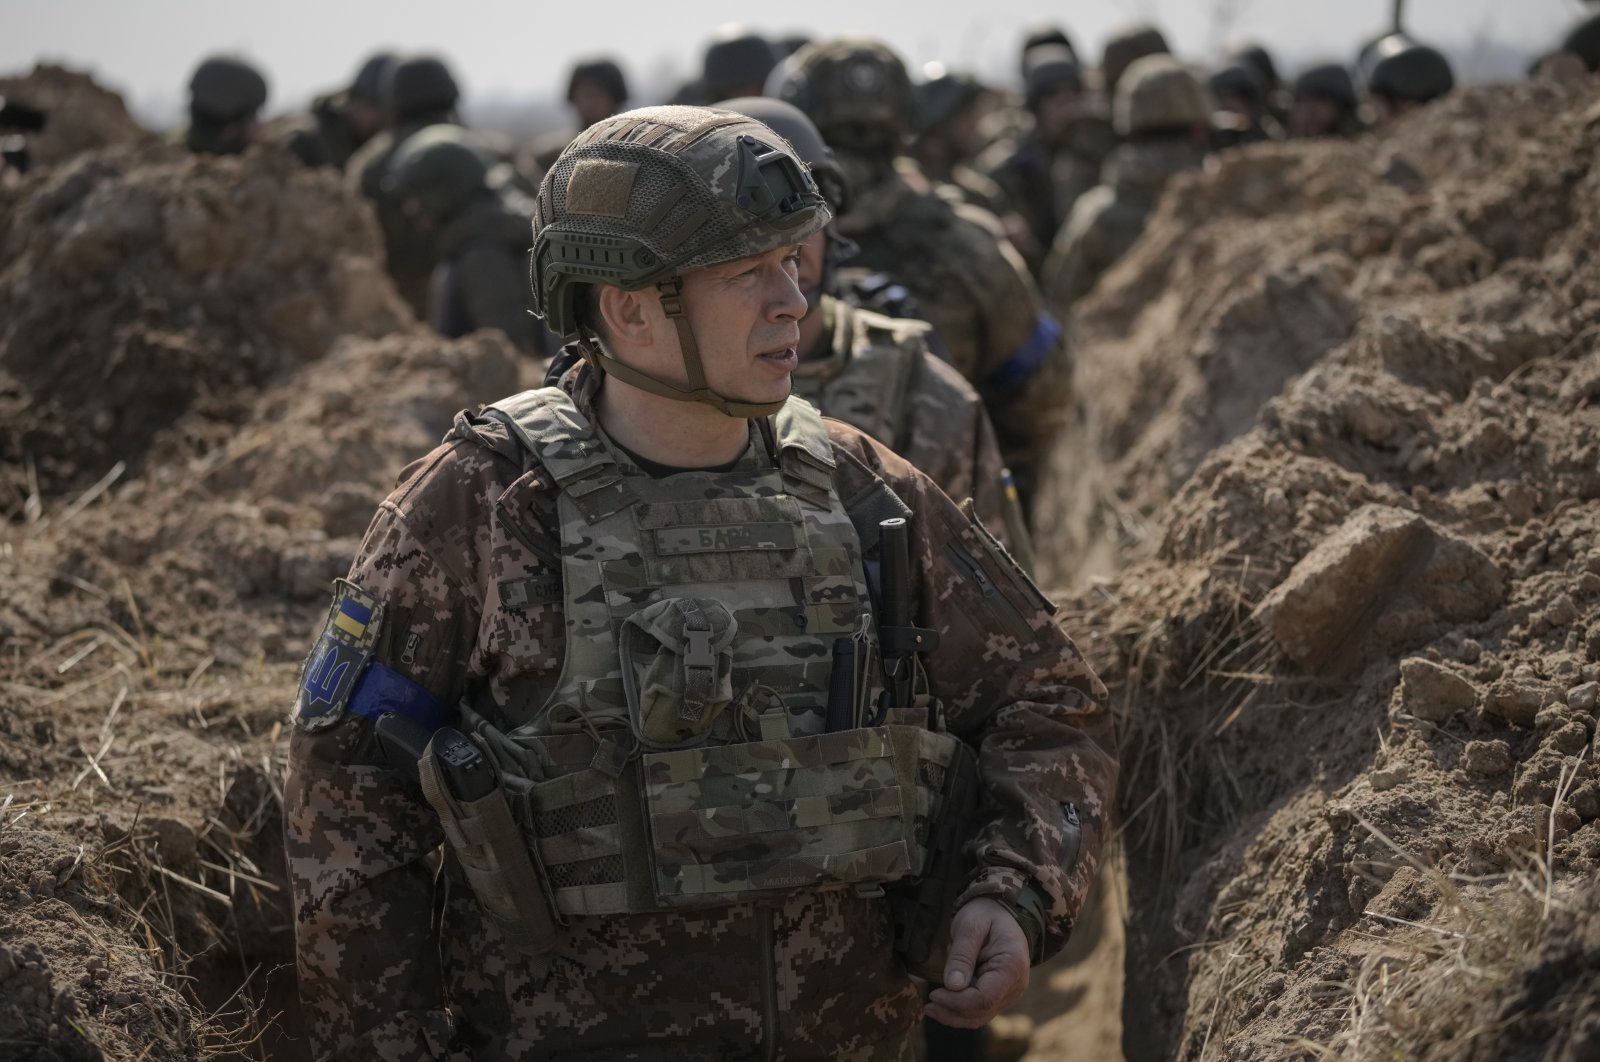 Col. Gen. Oleksandr Syrskyi, the top military commander in charge of the defense of the Ukrainian capital, walks in a trench at a position north of the capital Kyiv, Ukraine, Tuesday, March 29, 2022. (AP Photo)